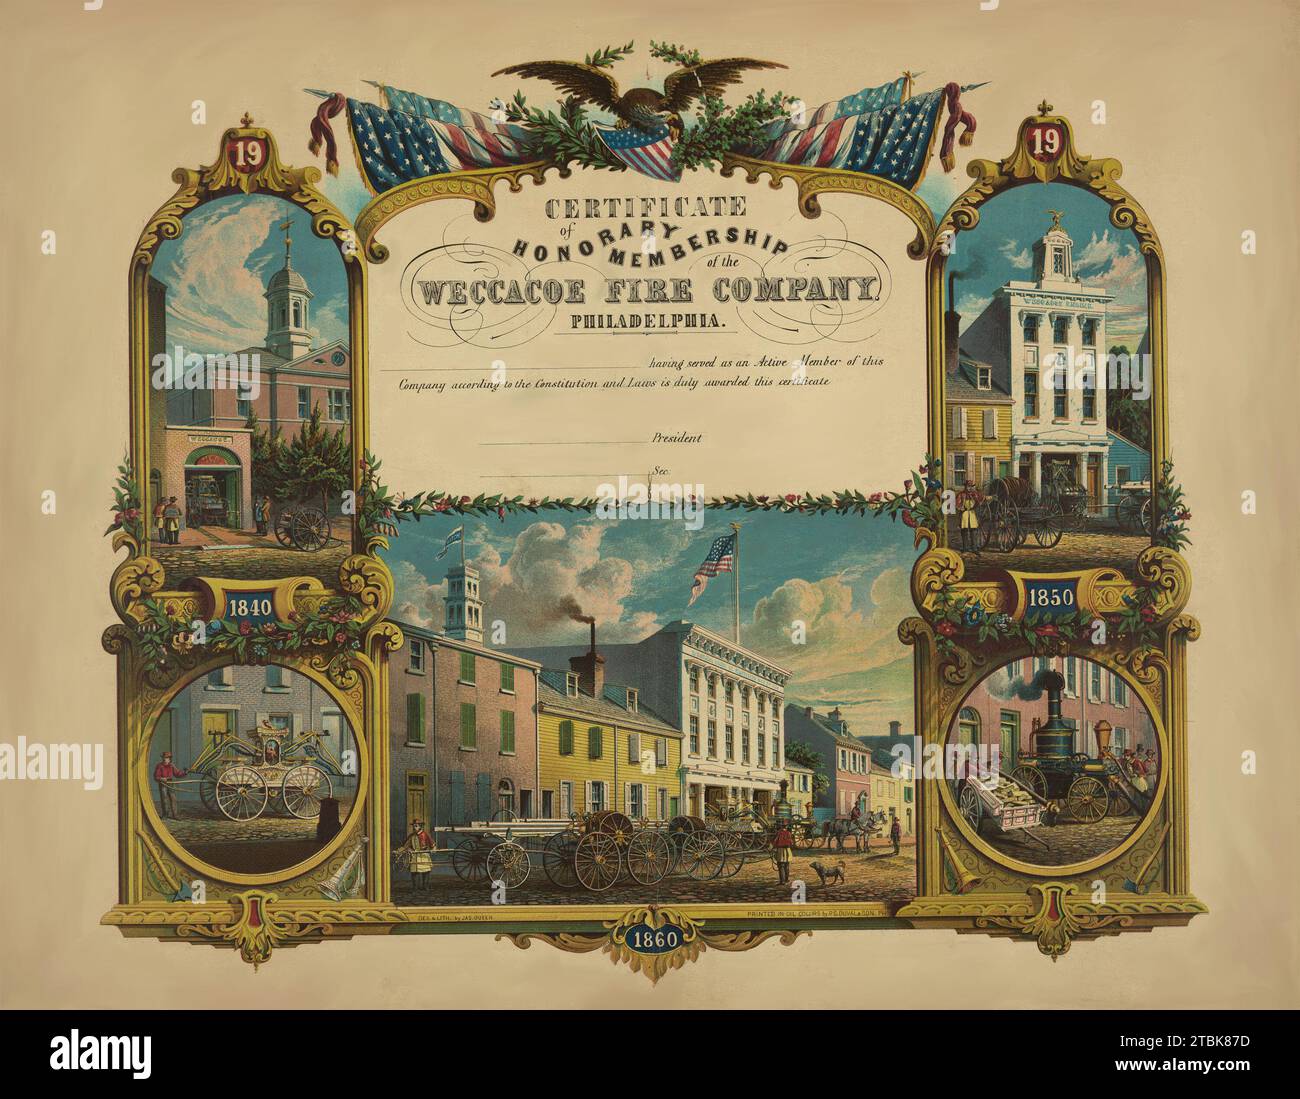 'Certificate of honorary membership of the Weccacoe Fire Company, Philadelphia / des. & lith. by Jas. Queen ; printed in oil colors by P.S. Duval & Son, Philadelphia.  Print shows a certificate for honorary membership in the Weccacoe Fire Company of Philadelphia, with views of five firehouses, horse-drawn engines, and other firefighting equipment.' Stock Photo